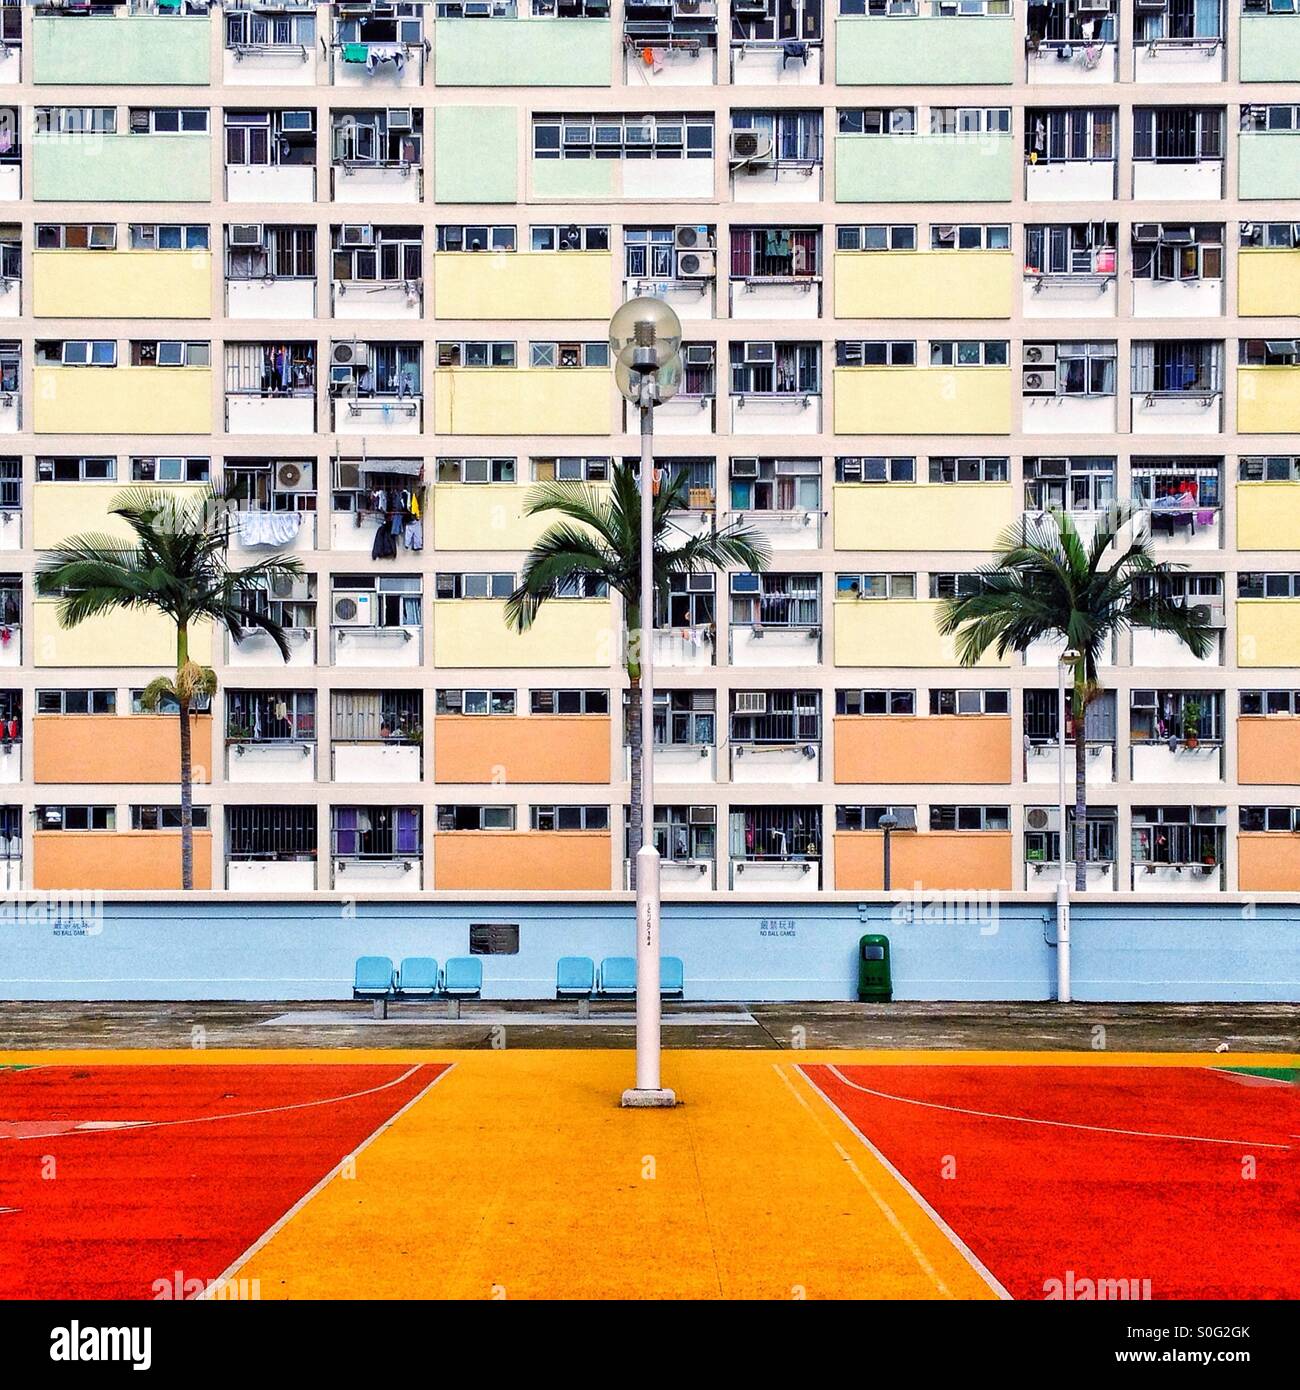 Colorful facade of Choi Hung estate, one of the oldest Public Housing complexes in Hong Kong Stock Photo